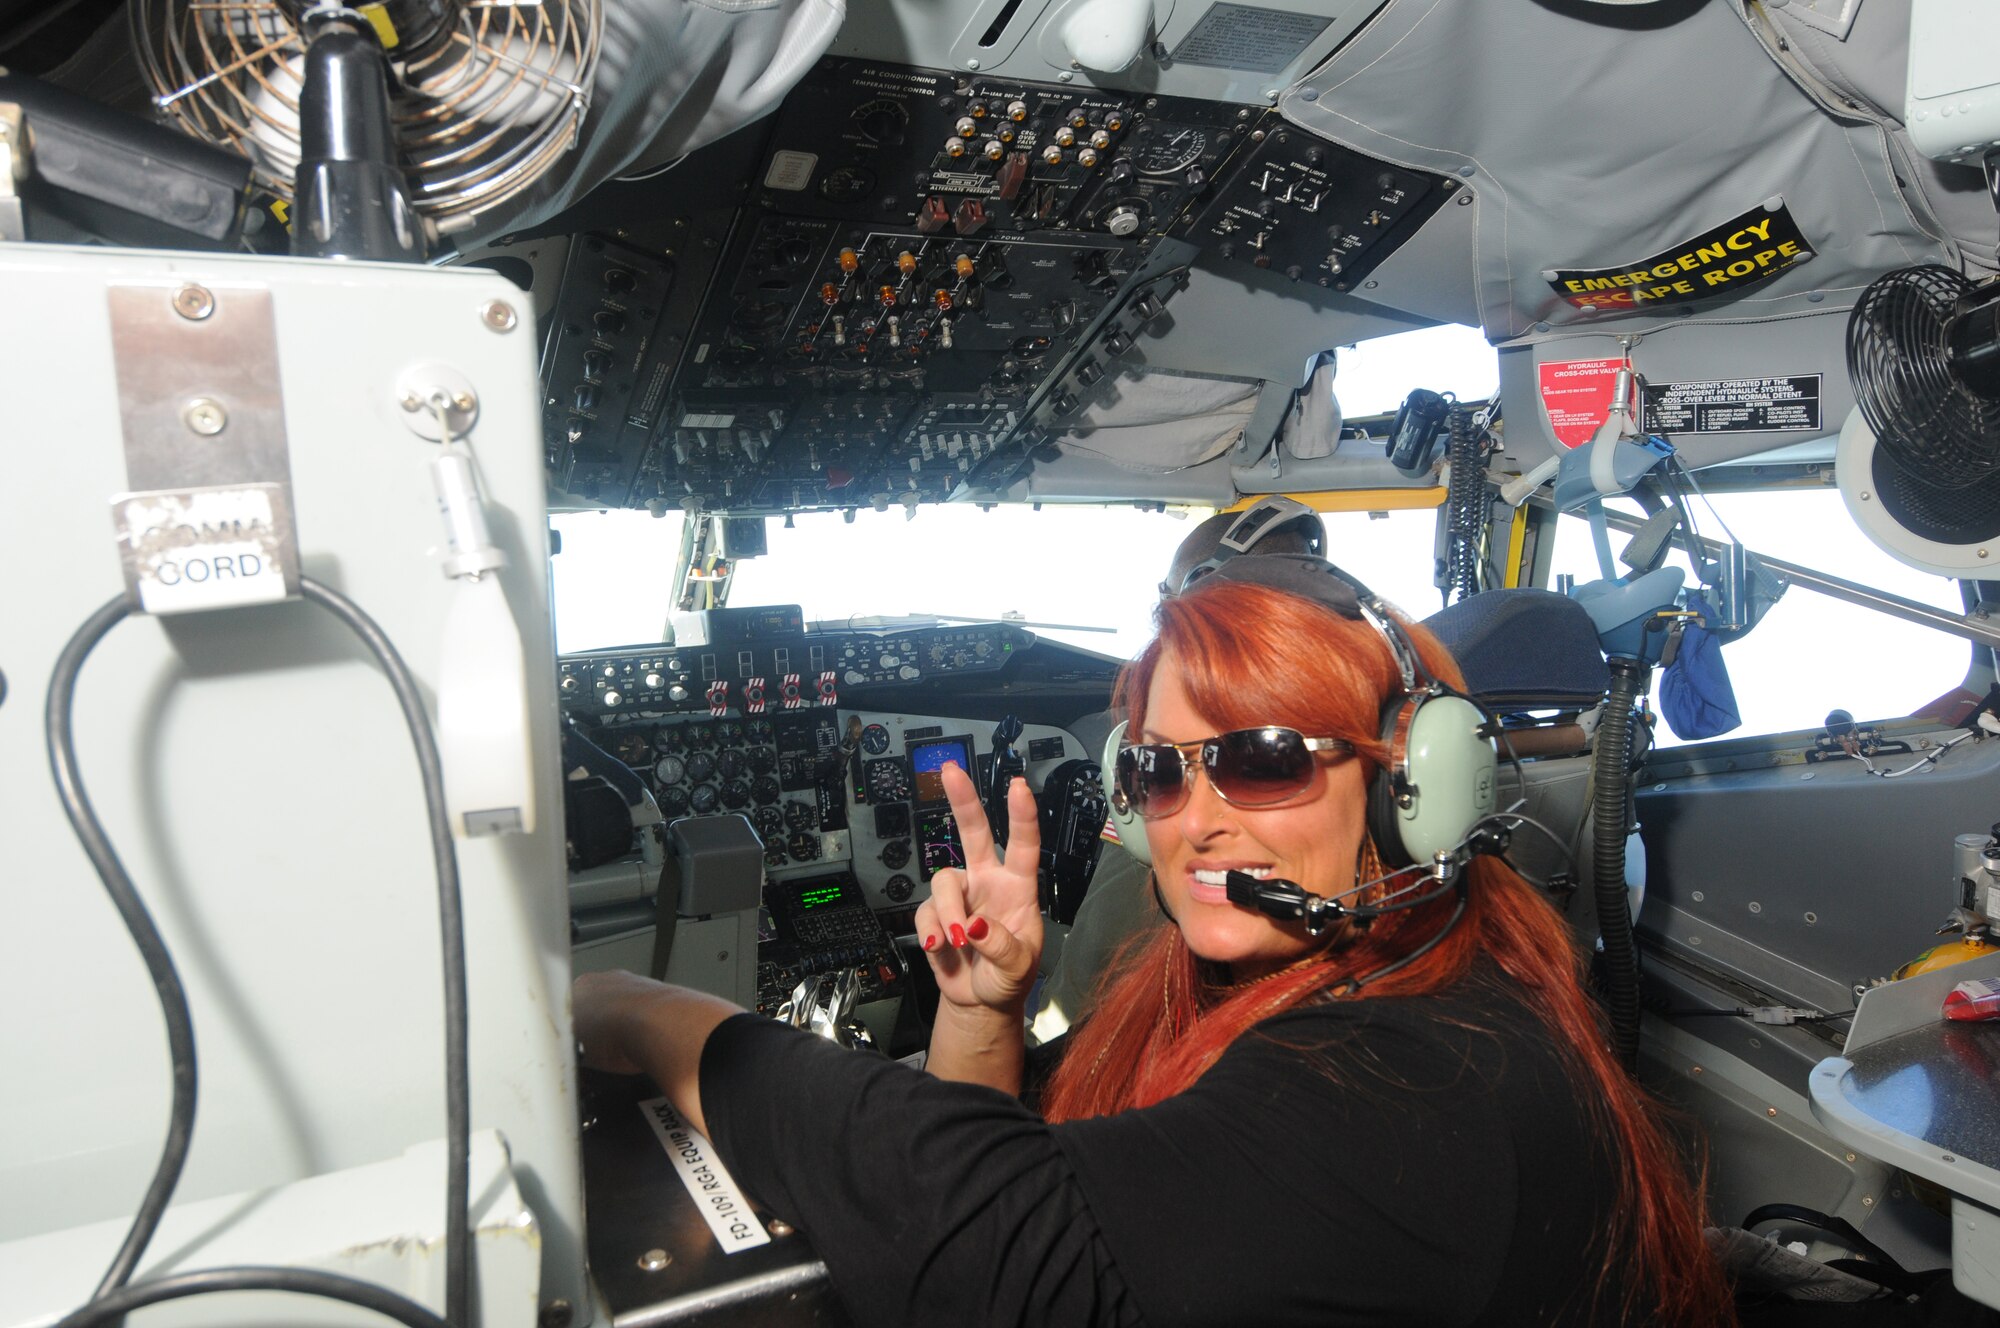 Wynonna Judd flashes the peace sign June 30, 2011, during an orientation flight aboard a KC-135 Stratotanker somewhere over the southeastern United States. Ms. Judd and her family had the opportunity to watch as the KC-135, from the 916th Air Refueling Wing, Seymour Johnson Air Force Base, N.C., refueled a pair of F-15 Strike Eagles, before returning to Robins Air Force Base, Ga. Ms Judd, a 5-time Grammy Award winning county singer, is the featured guest artists for the July 1 Independence Day Concert in Warner Robins, Ga. (U.S. Air Force photo/Ken Hackman)